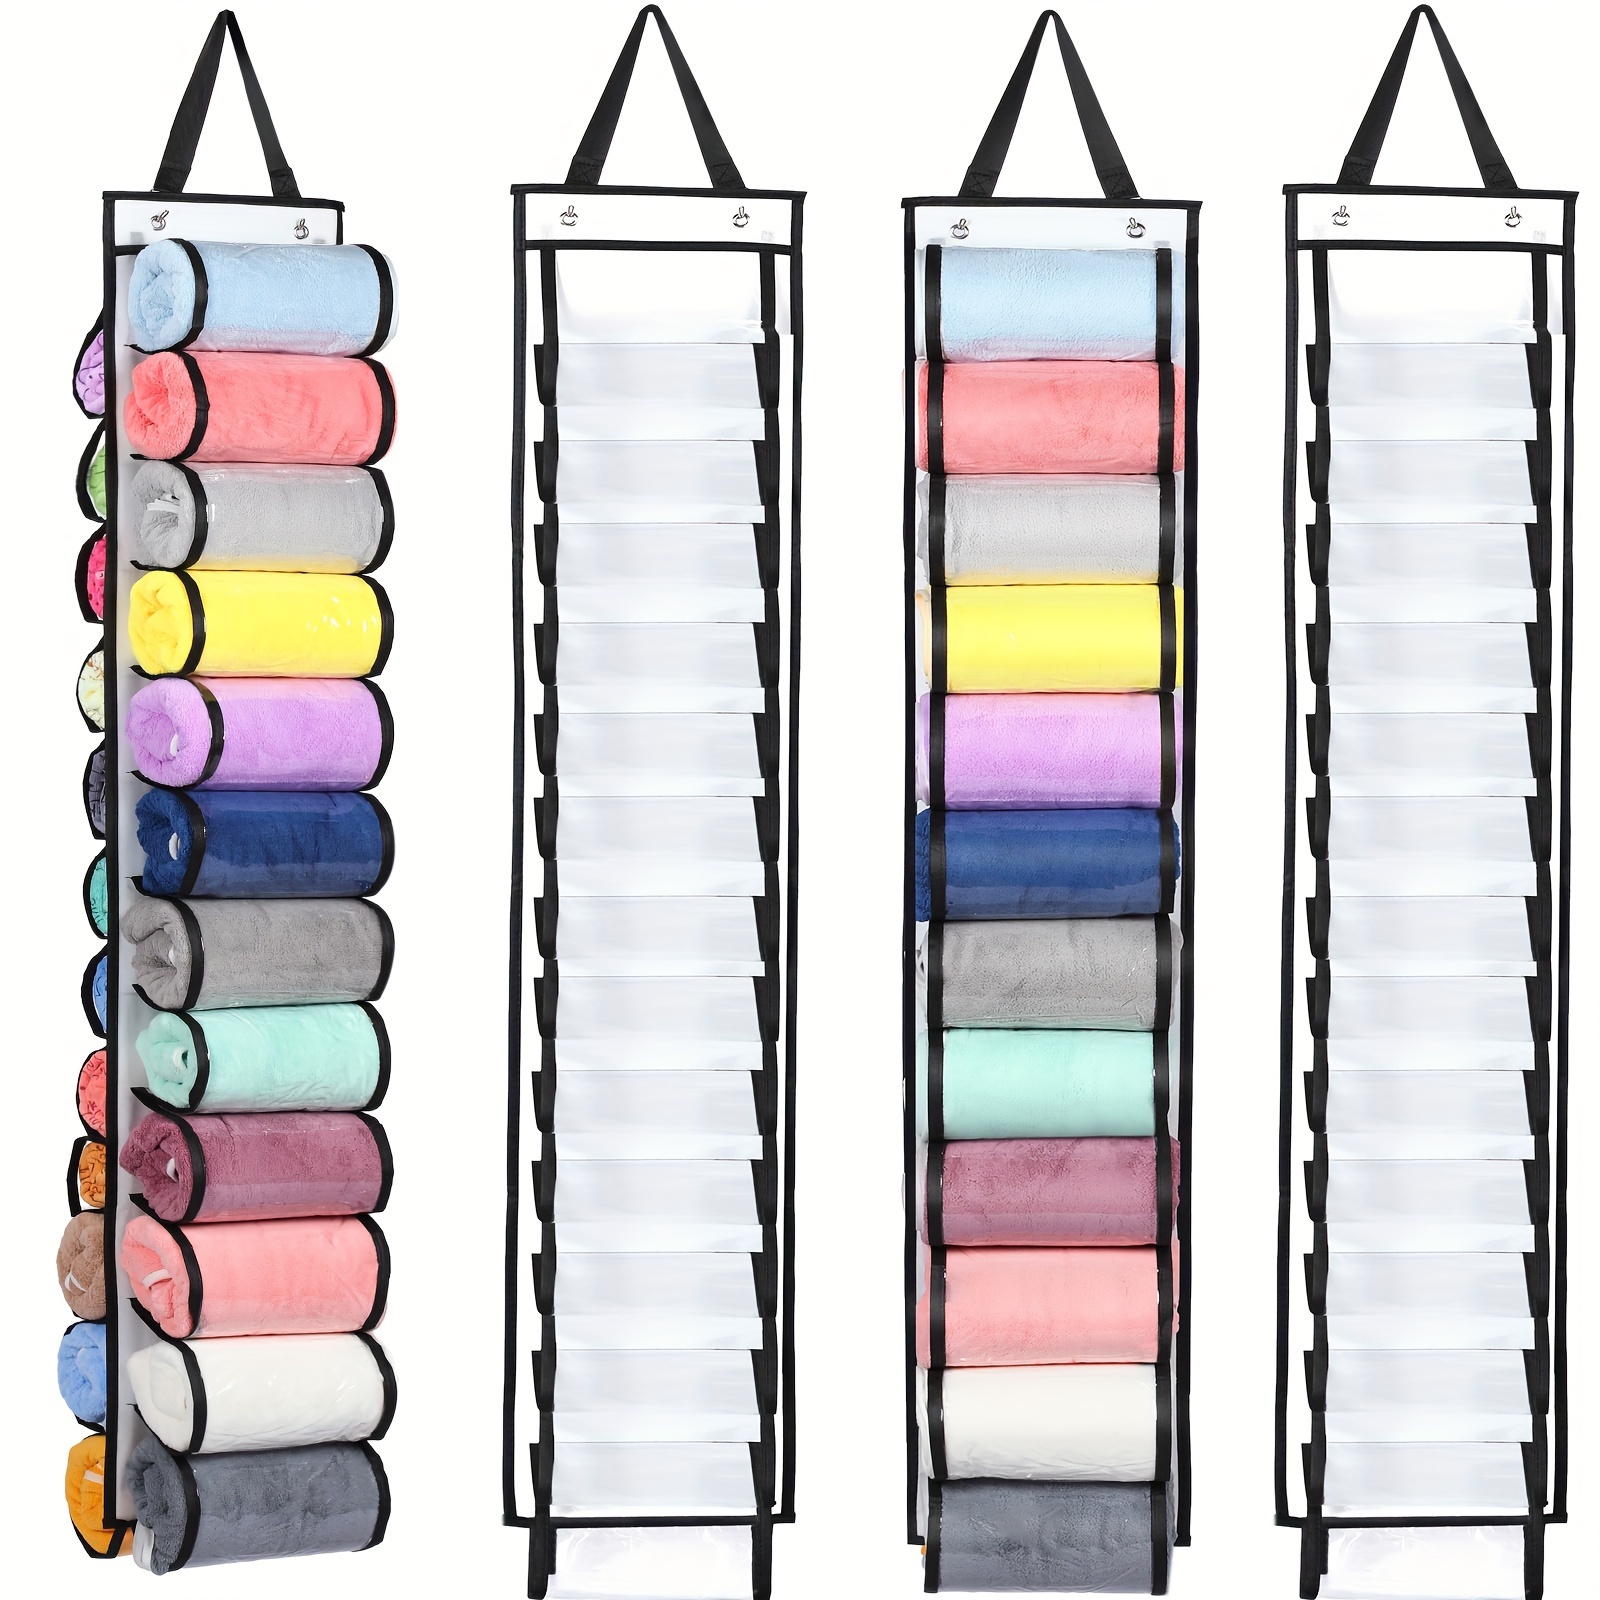 

4 Pack Legging Organizer For Closet Legging Storage Hanger Hanging With 24 Compartments Hanging Legging Holder Organizer T Shirts Clothes Roll Holder For Yoga Leggings Clothes Roll